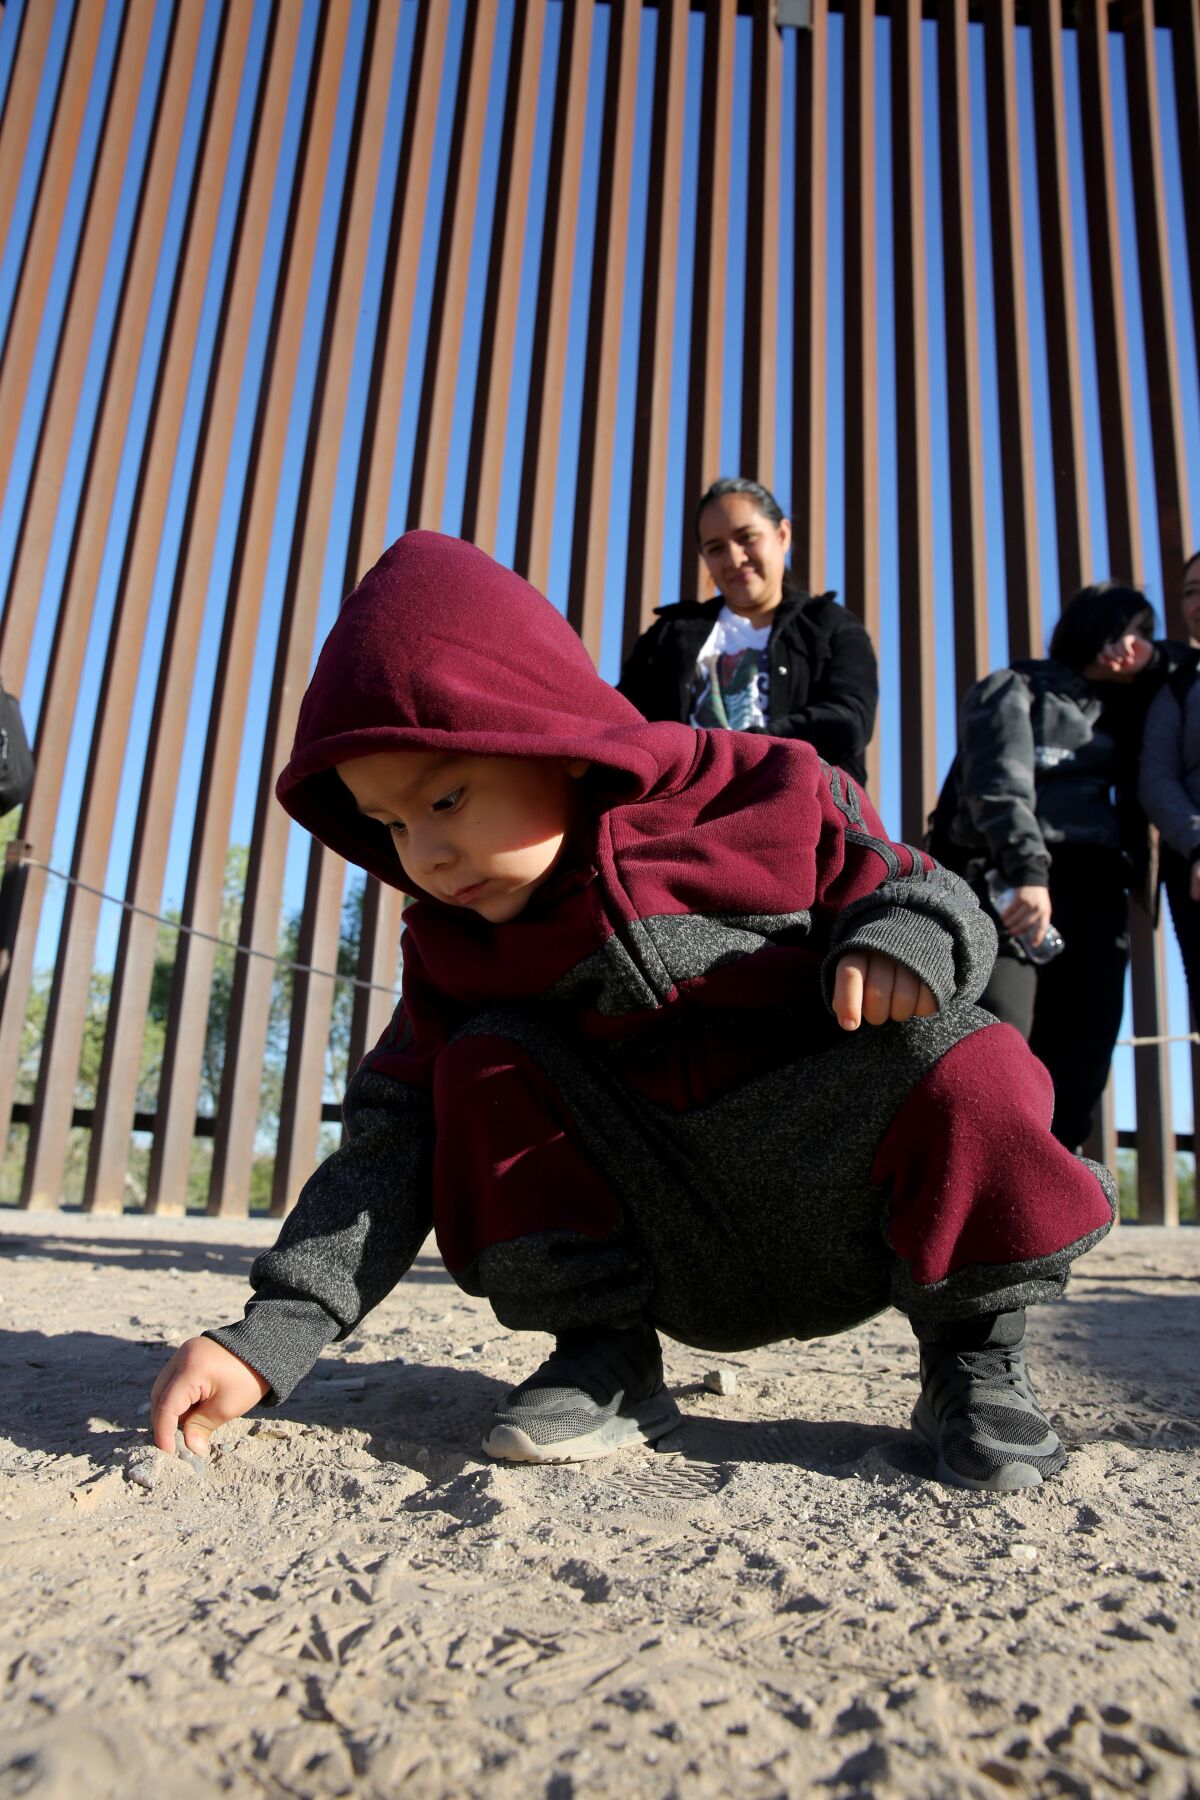 A small boy in a hoodie squatting and drawing on the dusty ground near the border wall as a woman in the background watches